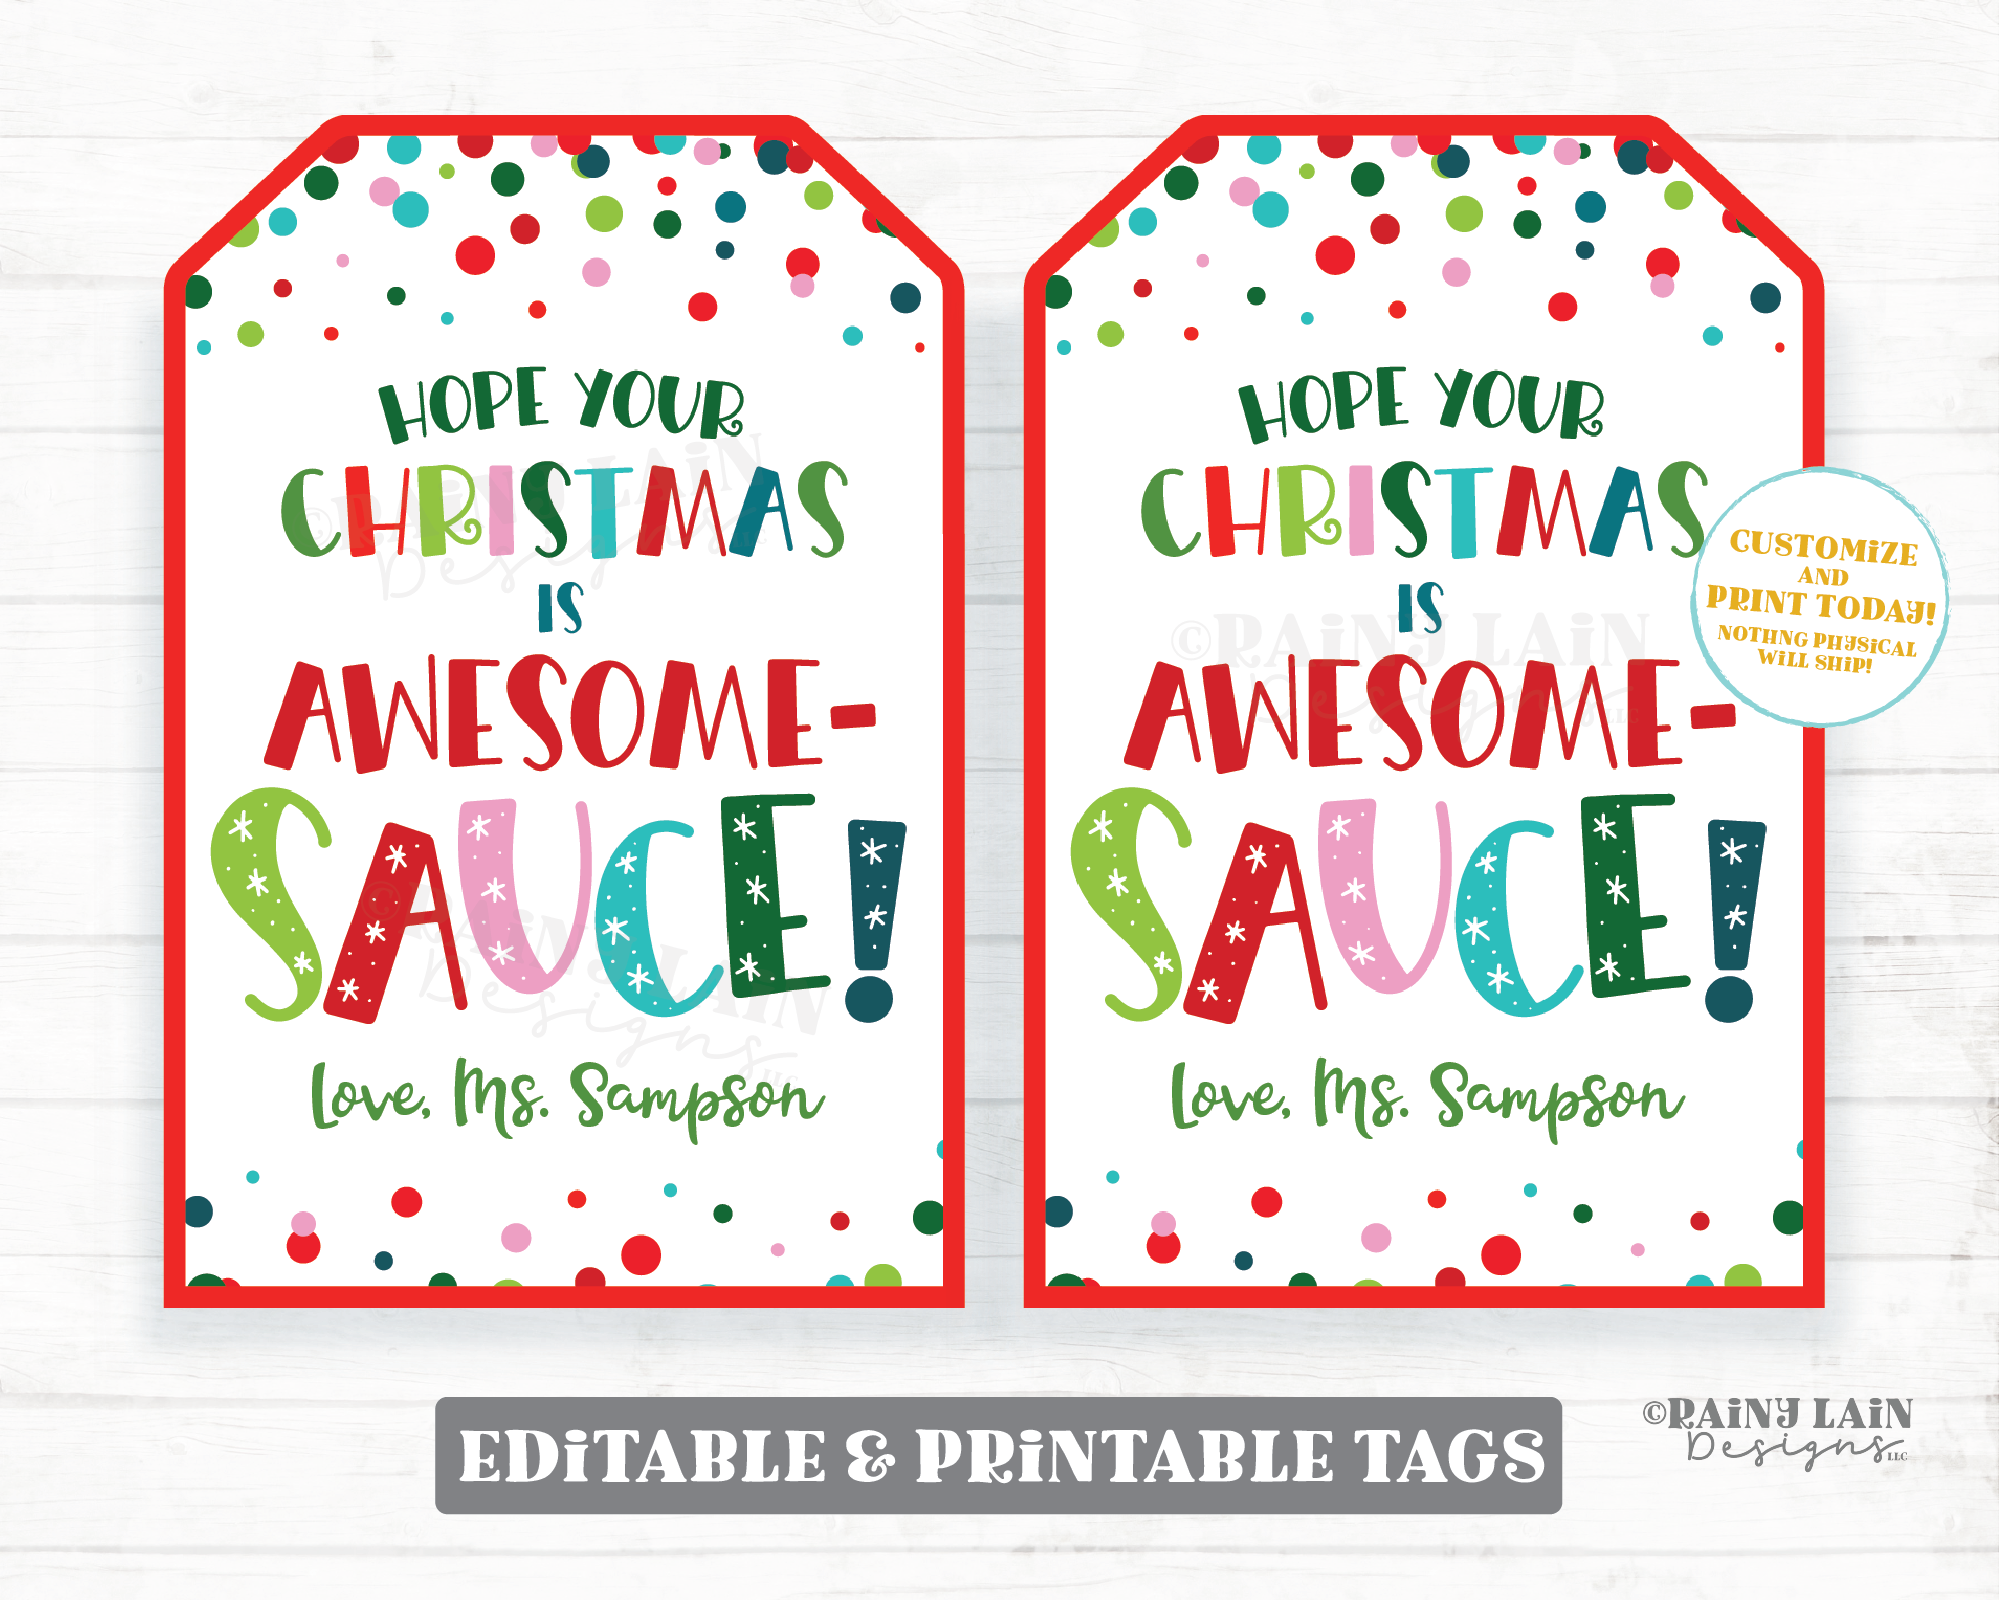 Christmas is Awesome Sauce Tag Holiday Applesauce Pouch Gift Tag From Teacher to Student Classroom Preschool Kids Printable Winter Favor Tag